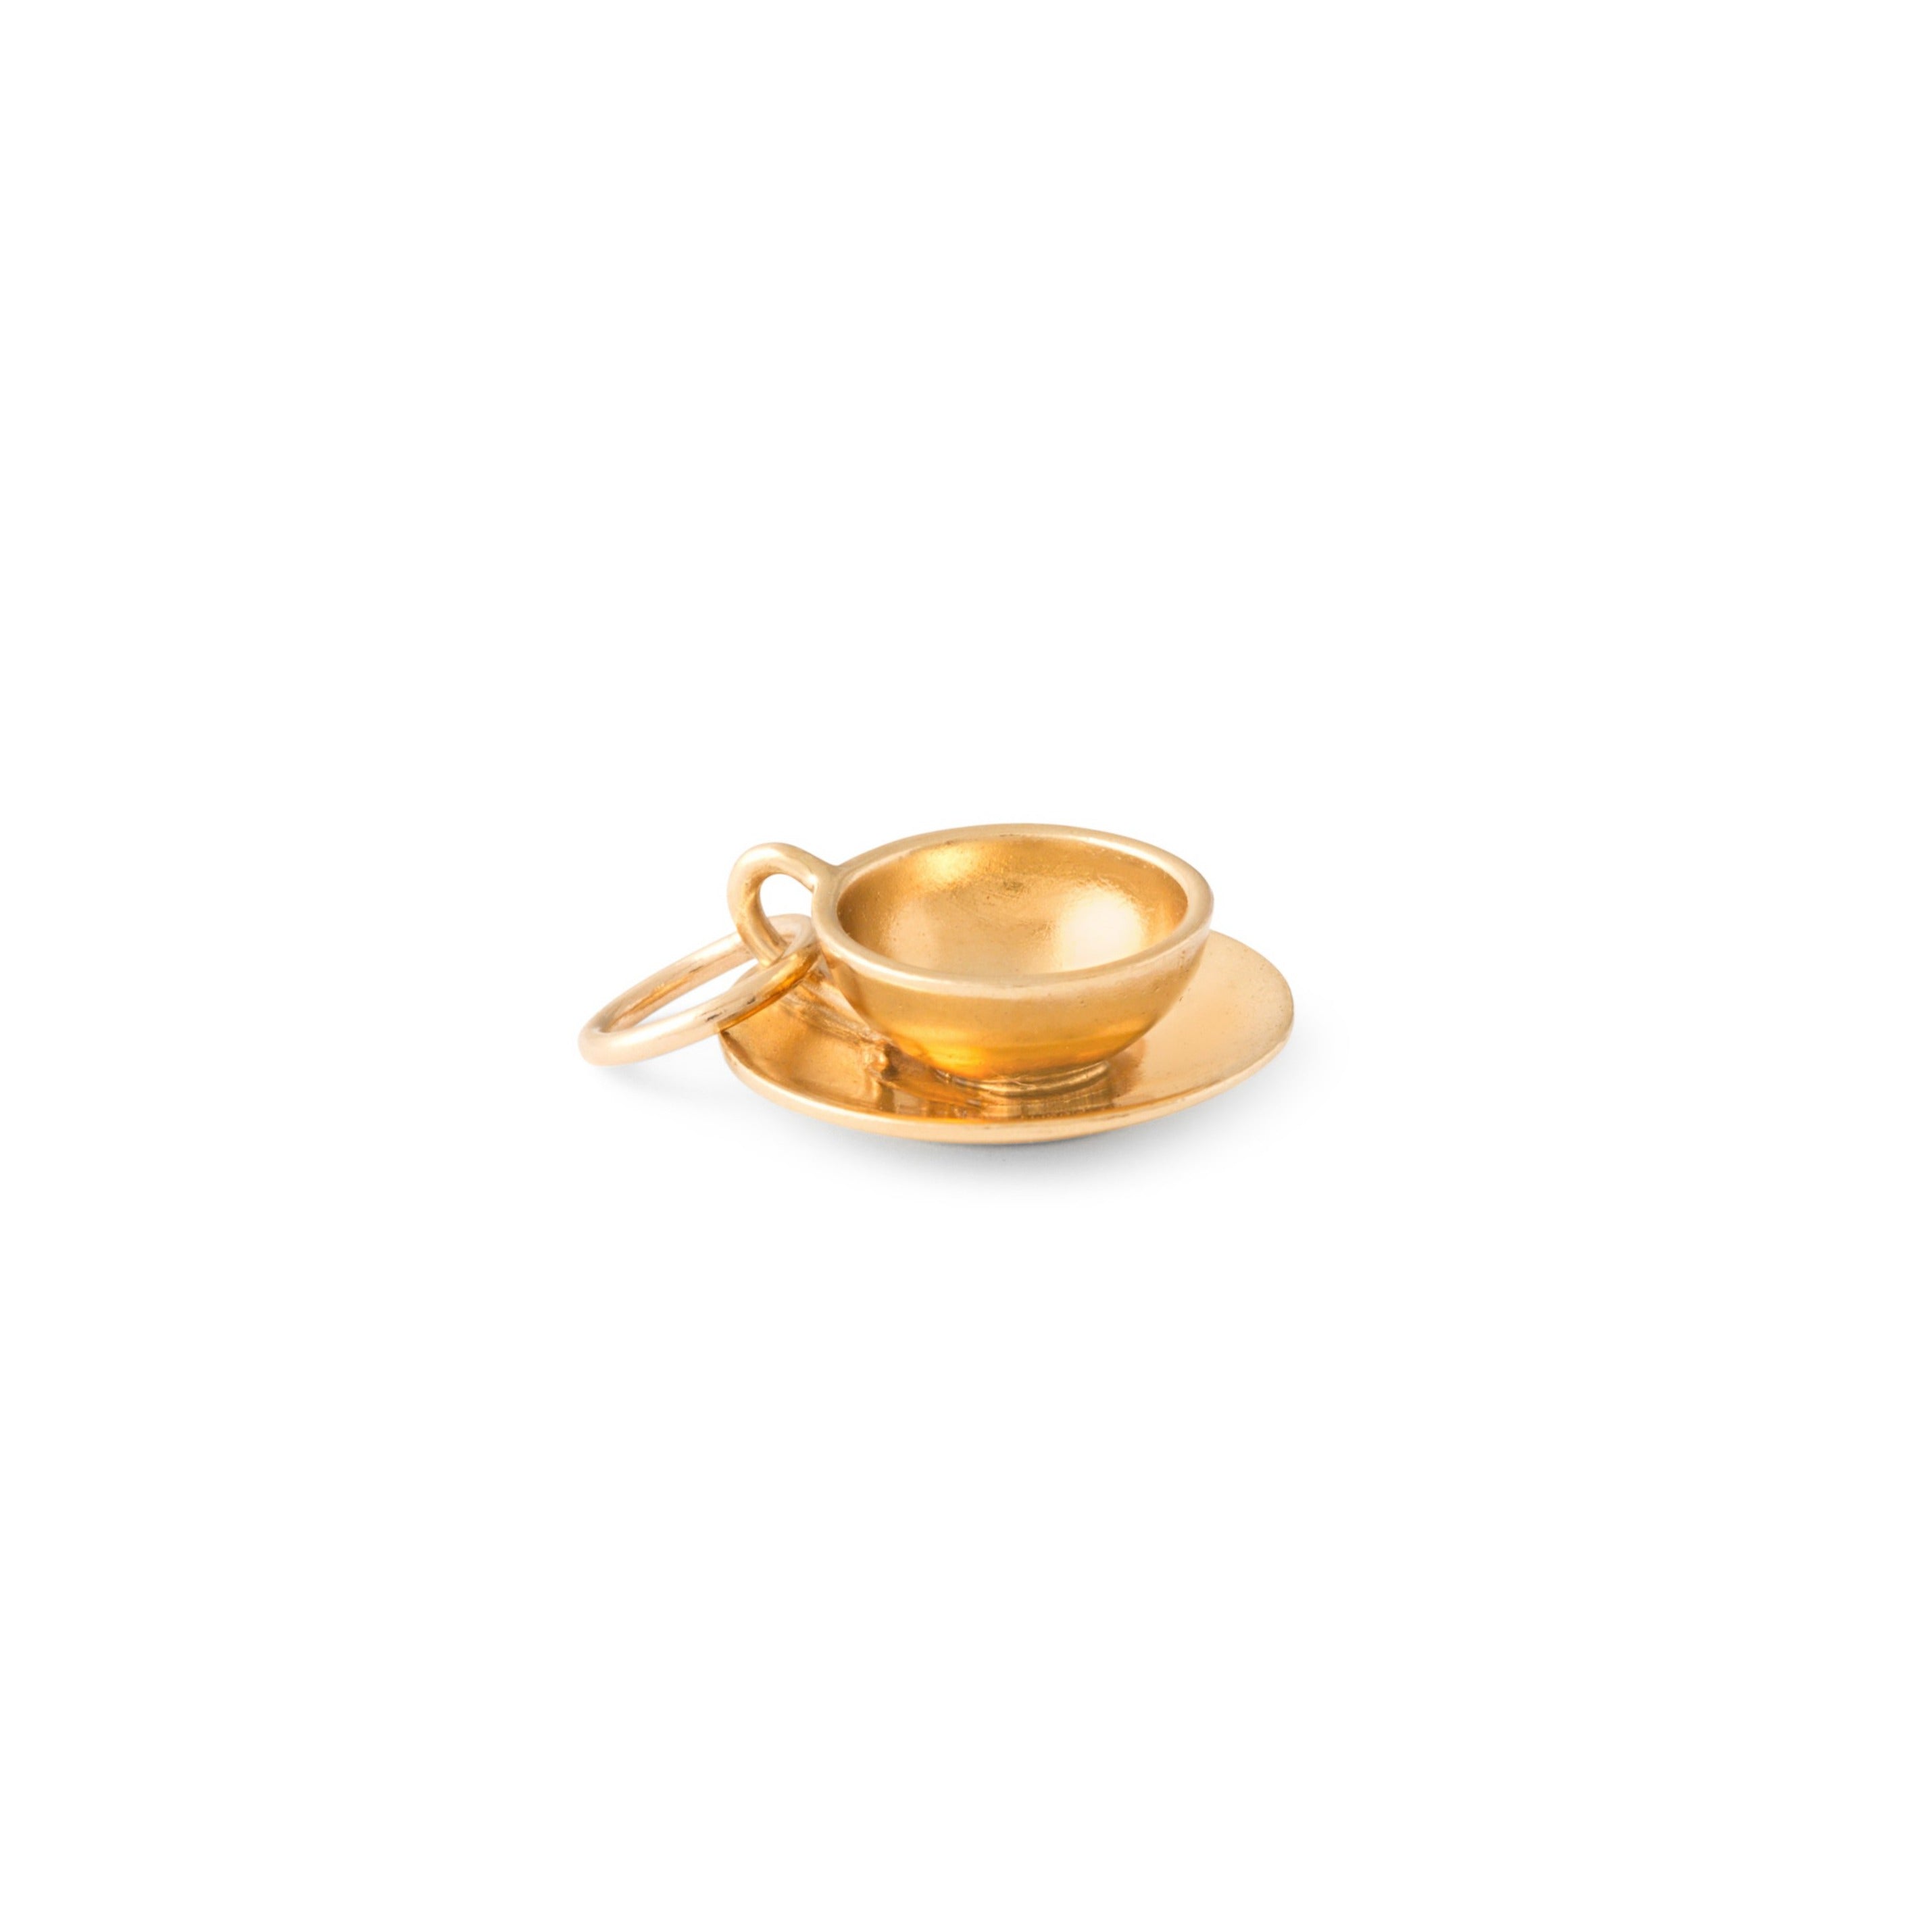 Cup and Saucer 14k Gold Charm